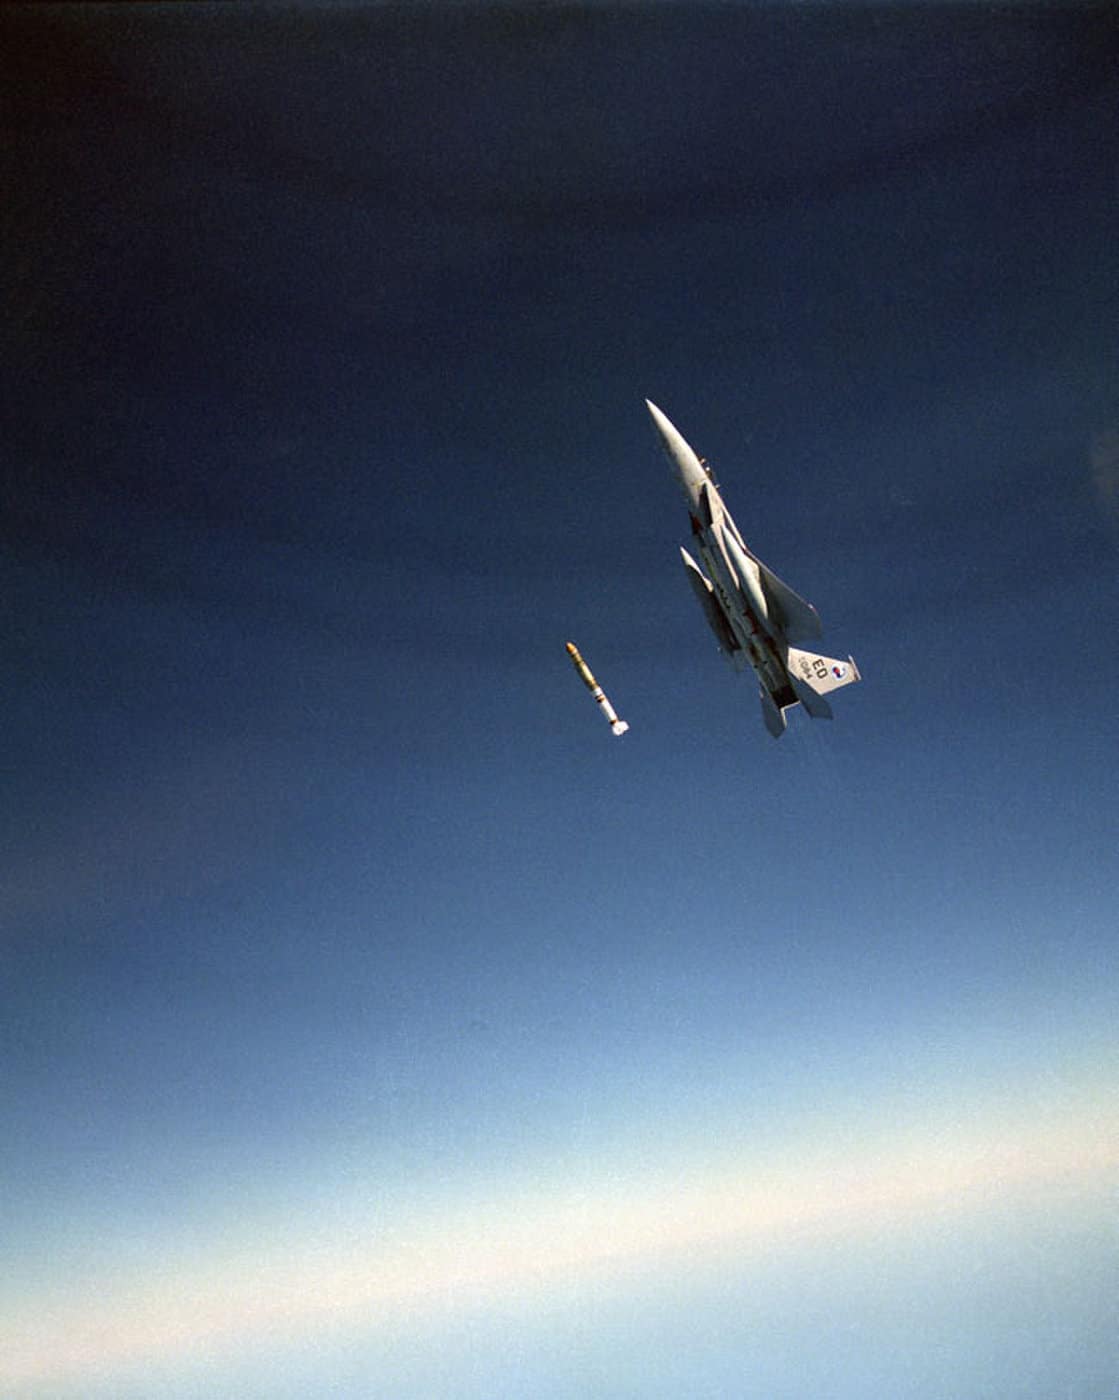 Maj. Wilbert ‘Doug’ Pearson fires an anti-satellite missile launched from a highly modified F-15A over the Pacific Missile Test Range off the coast of California, September 13, 1985. ©United States Air Force